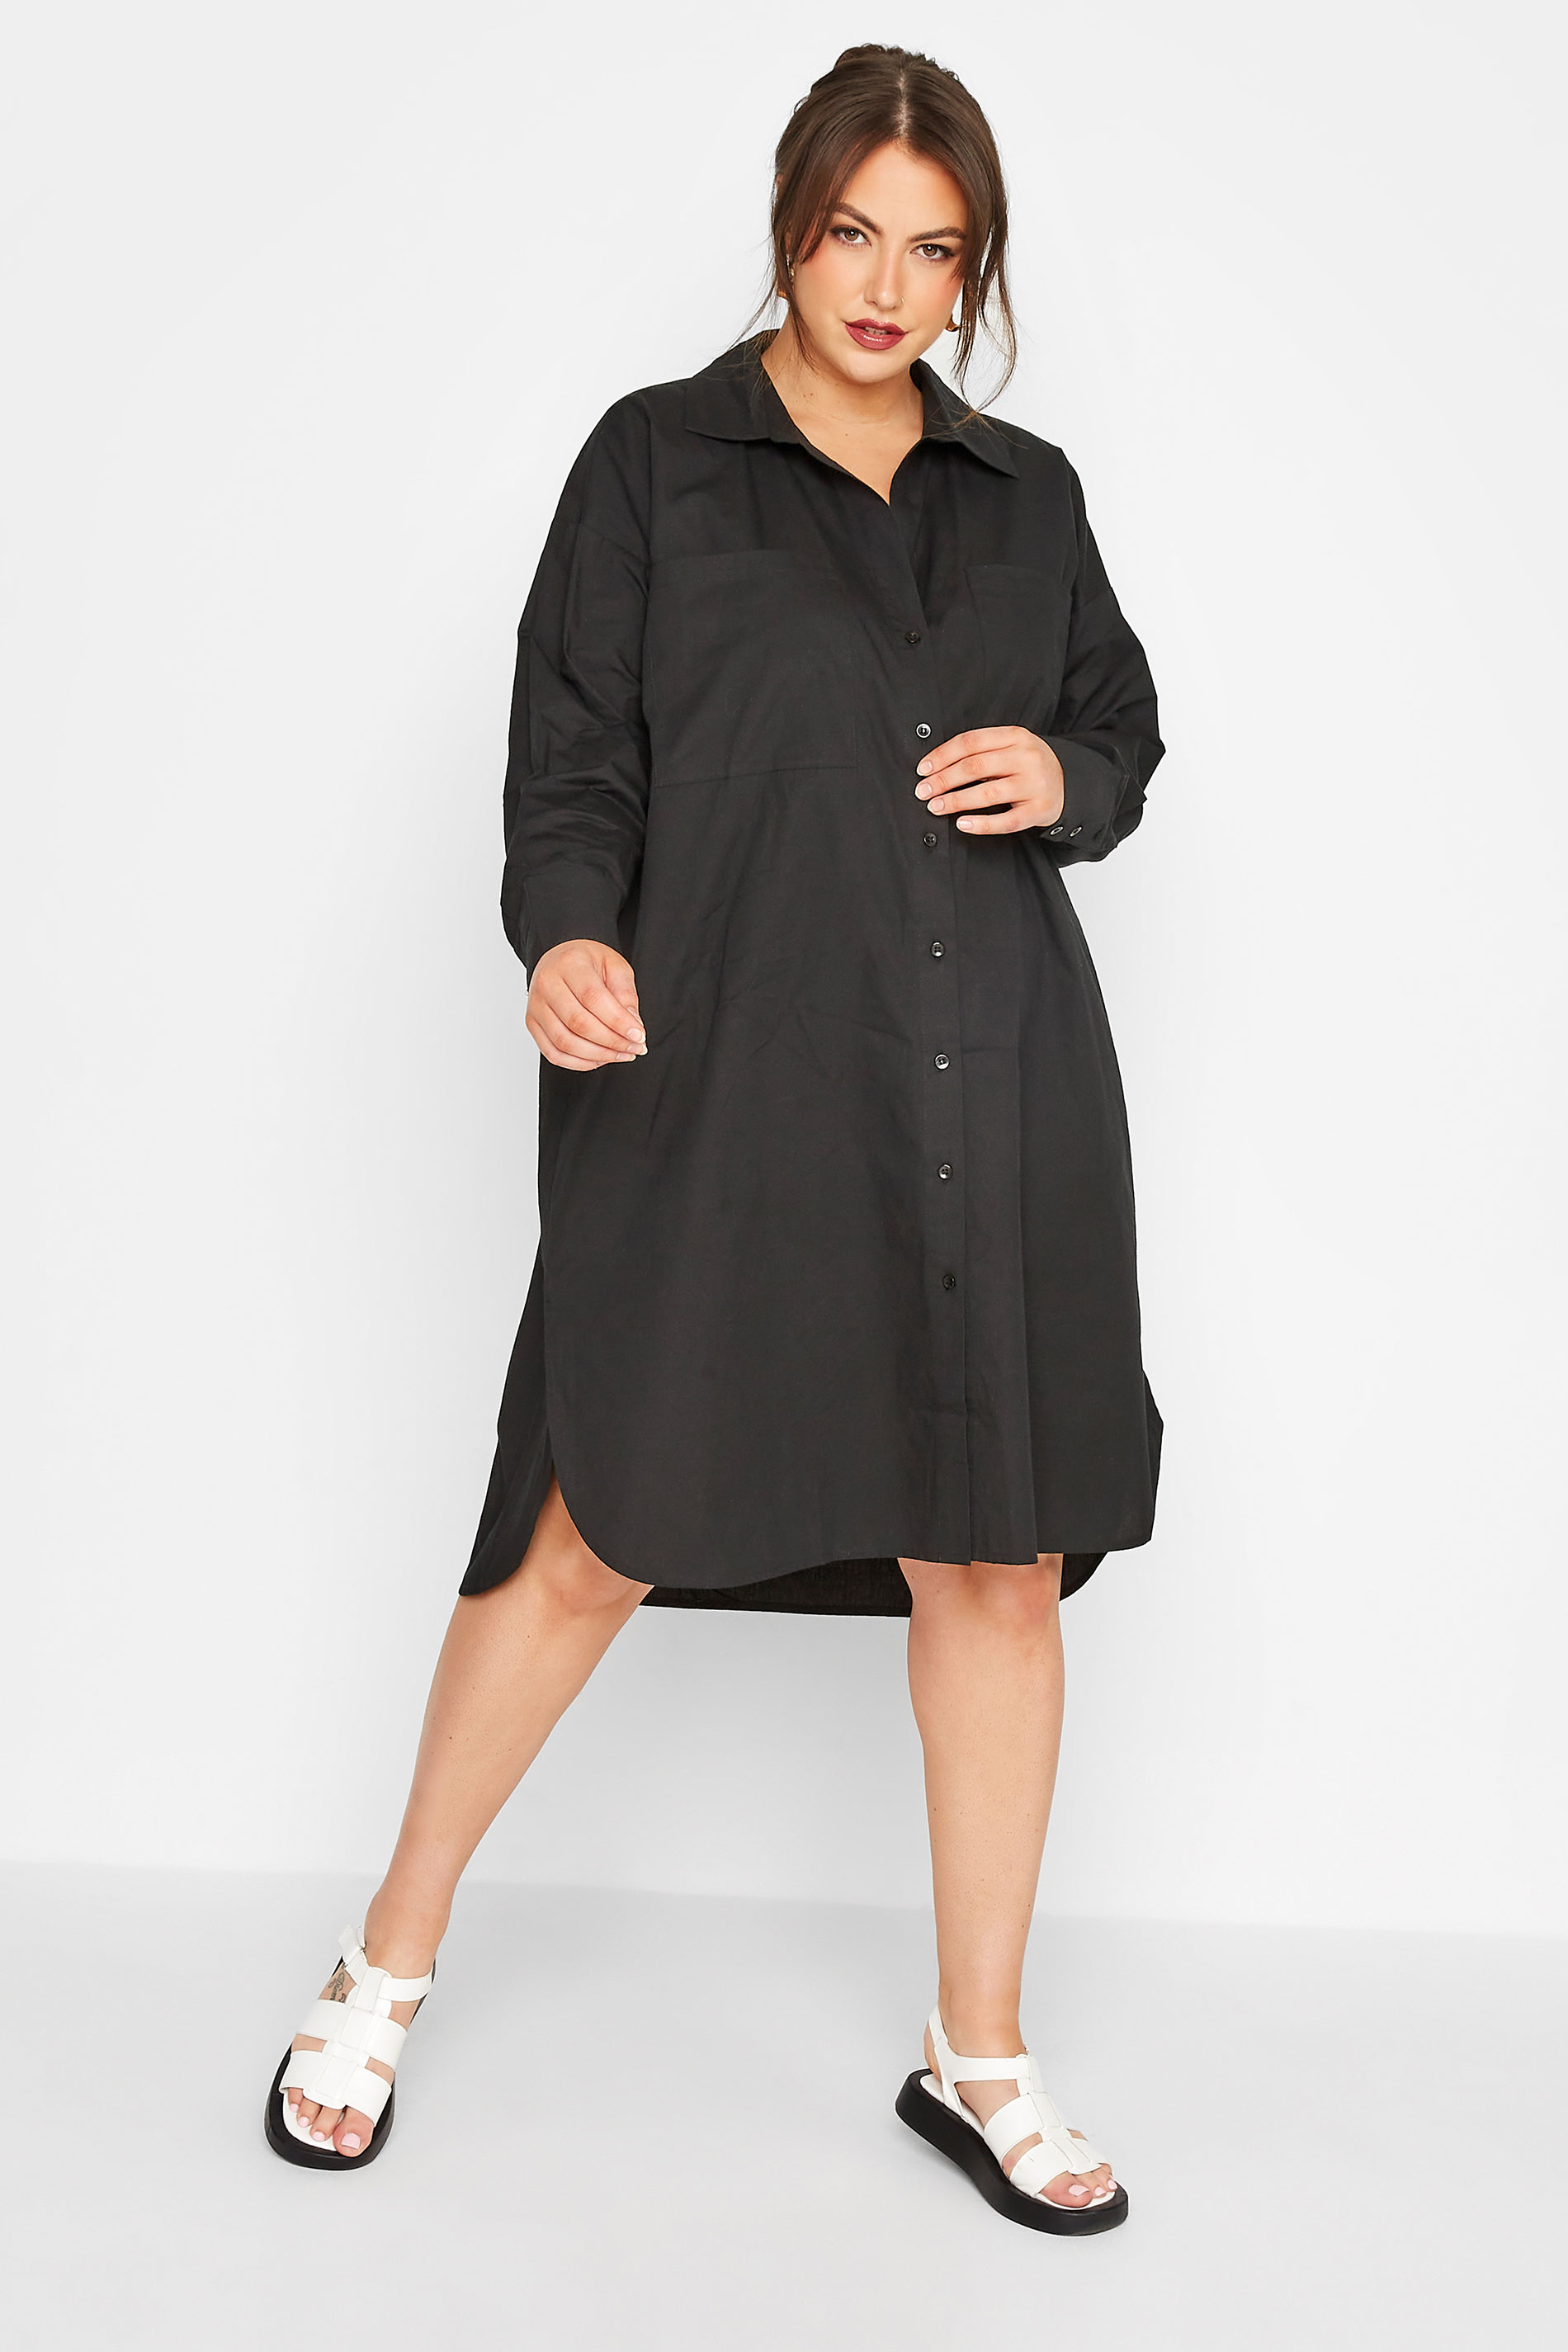 Robes Grande Taille Grande taille  Robes Manches Longues | LIMITED COLLECTION - Robe-Chemisier Noire Manches Longues - UP05536